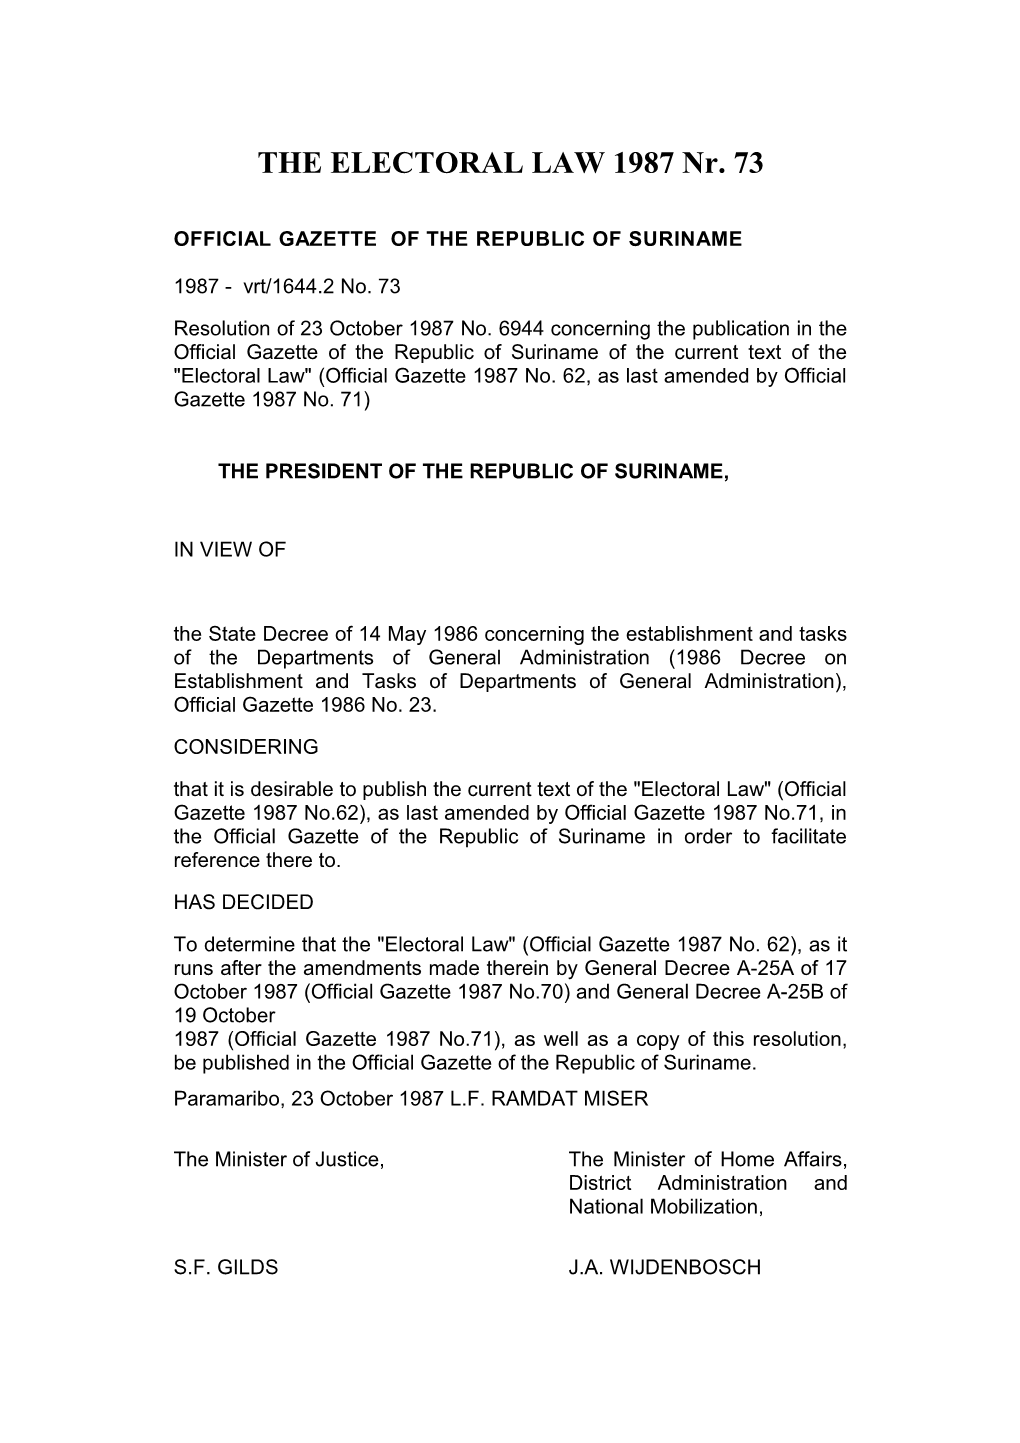 Official Gazette of the Republic of Suriname